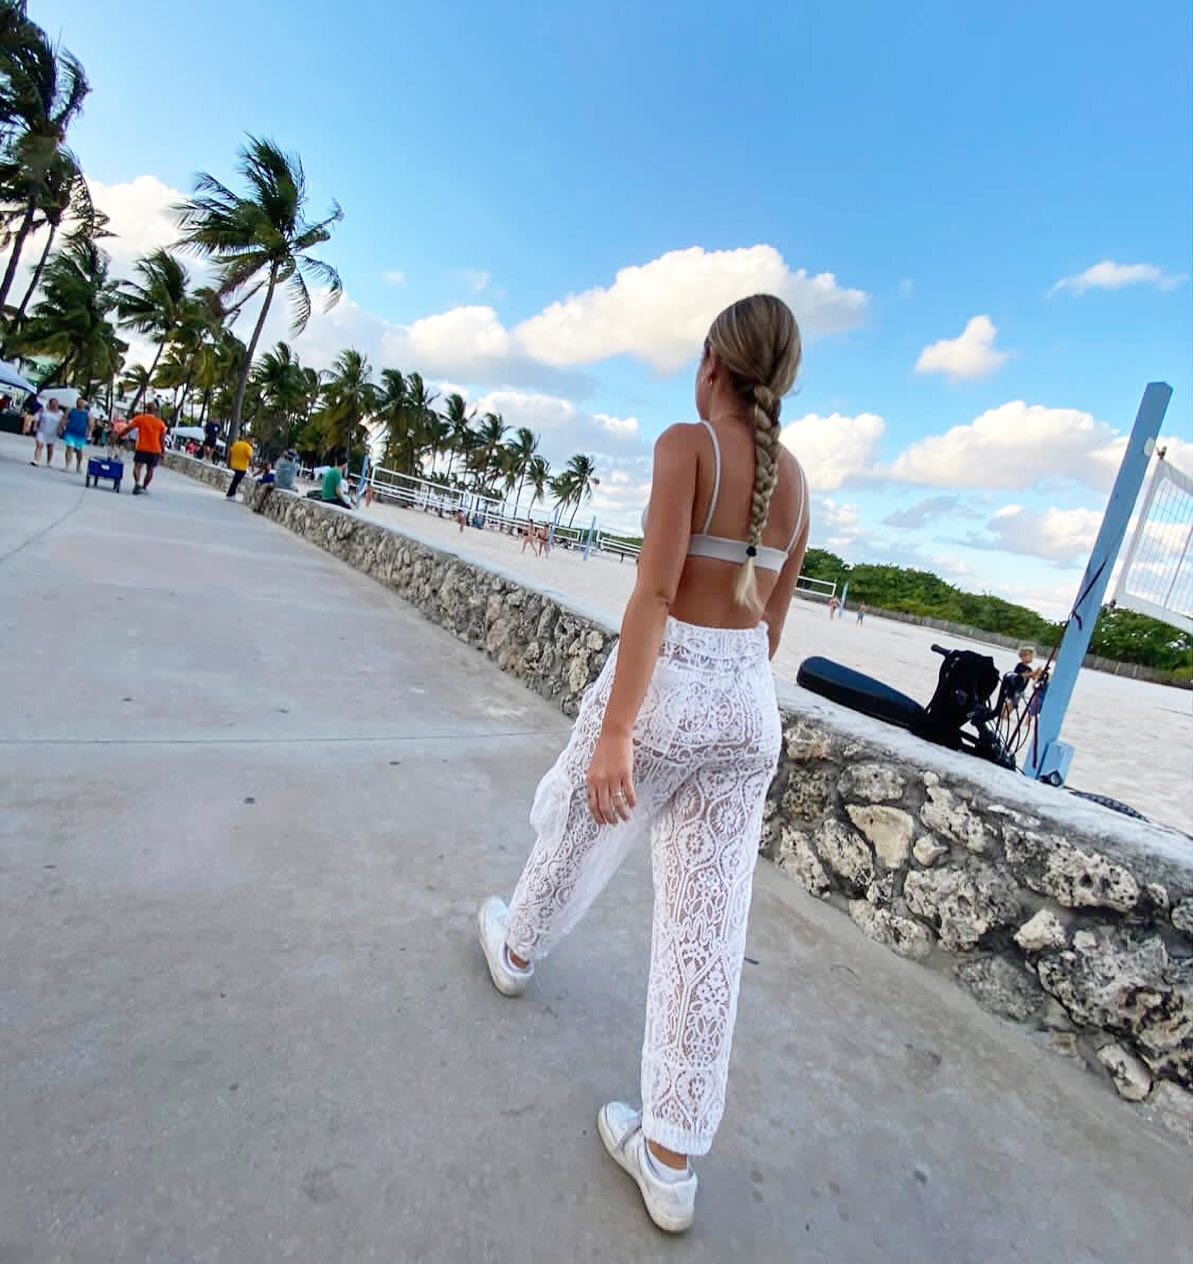 These pieces always have a way of finding the perfect home. So glad the lacey cargo pants are taking up residence with @samanthathompsn in South Beach 🌴🤍😎